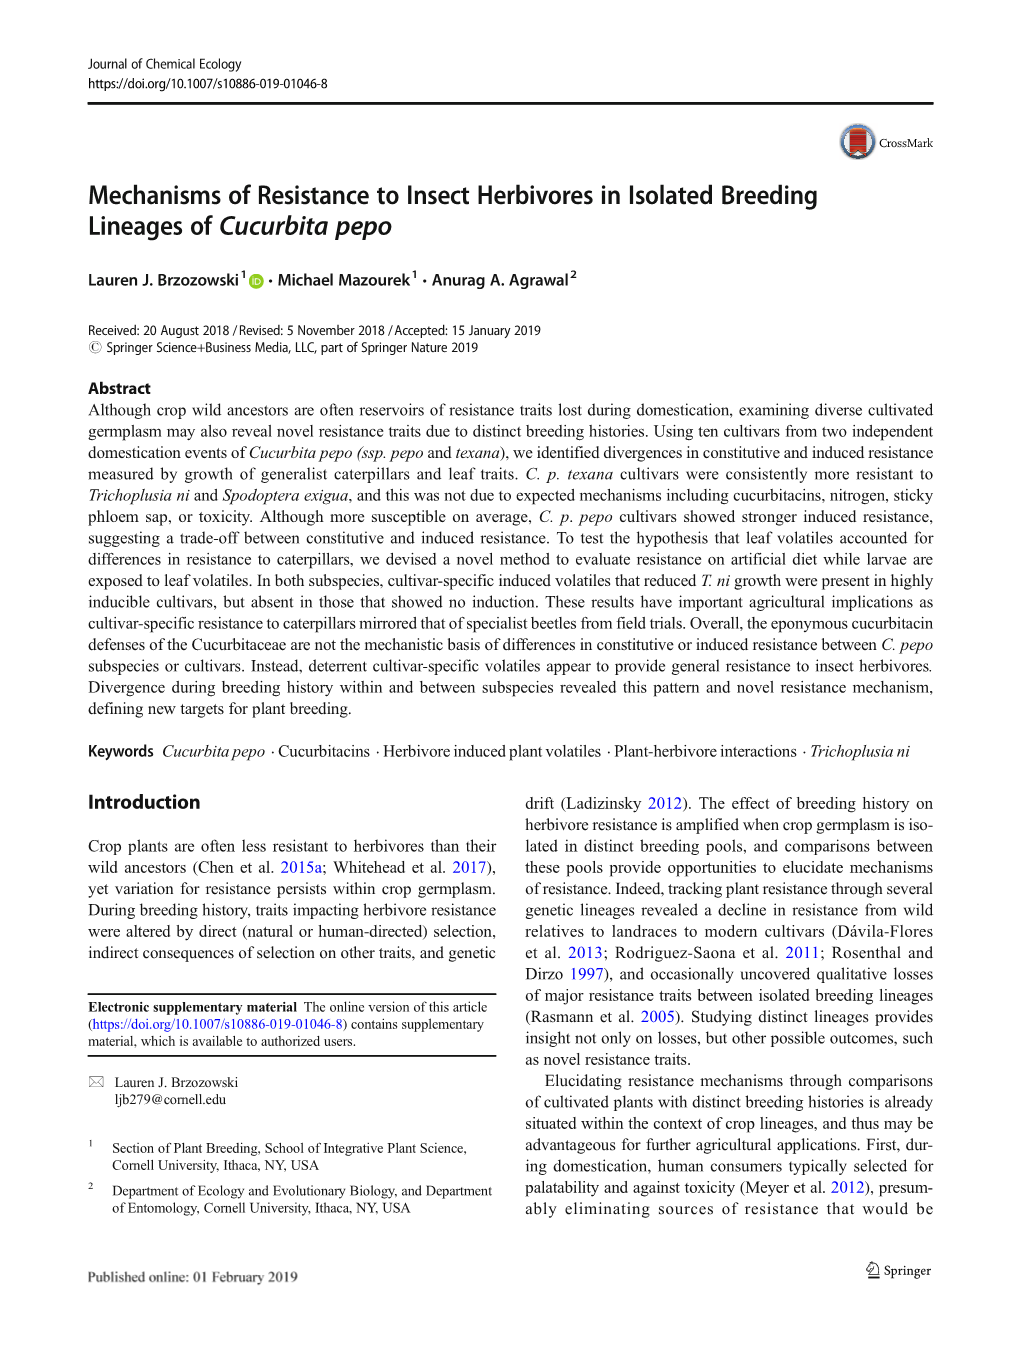 Mechanisms of Resistance to Insect Herbivores in Isolated Breeding Lineages of Cucurbita Pepo